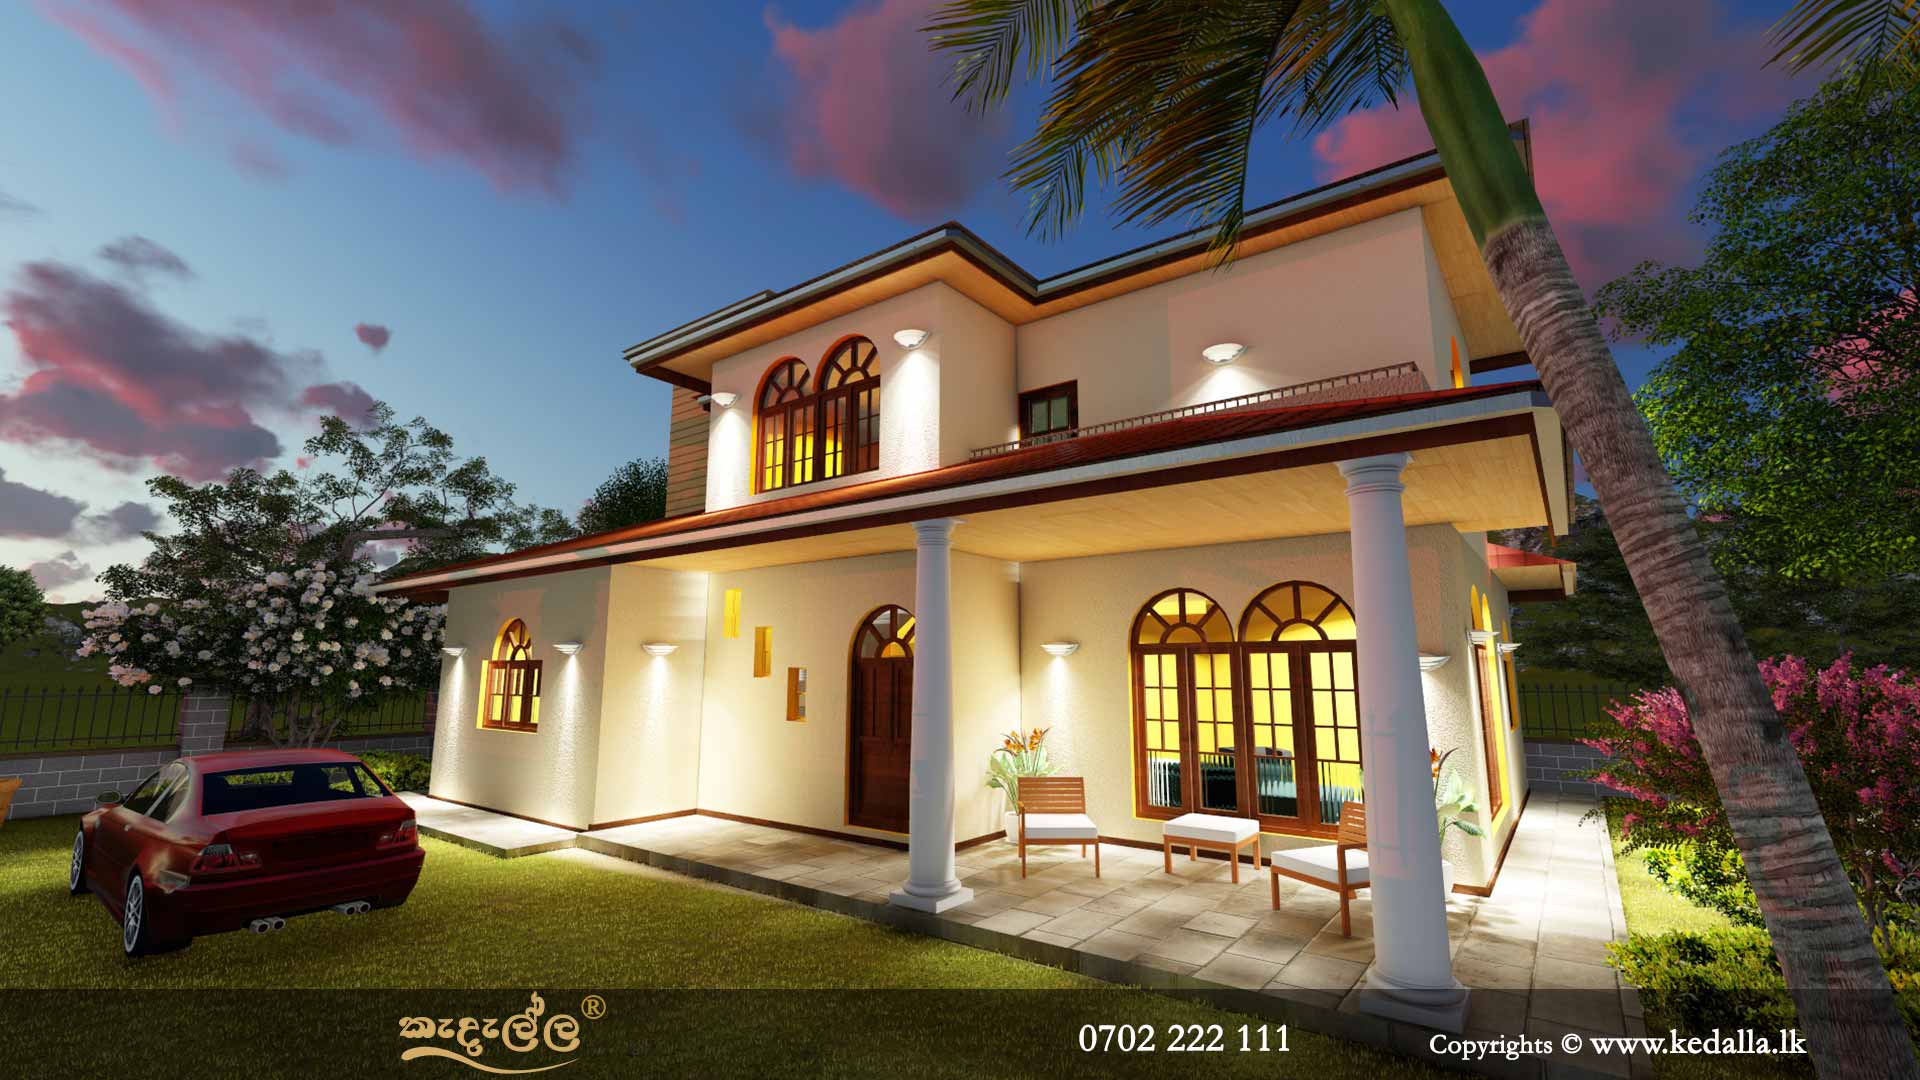 Top architect in Kandy designed roof type traditional two story house plan with beautiful open verandah